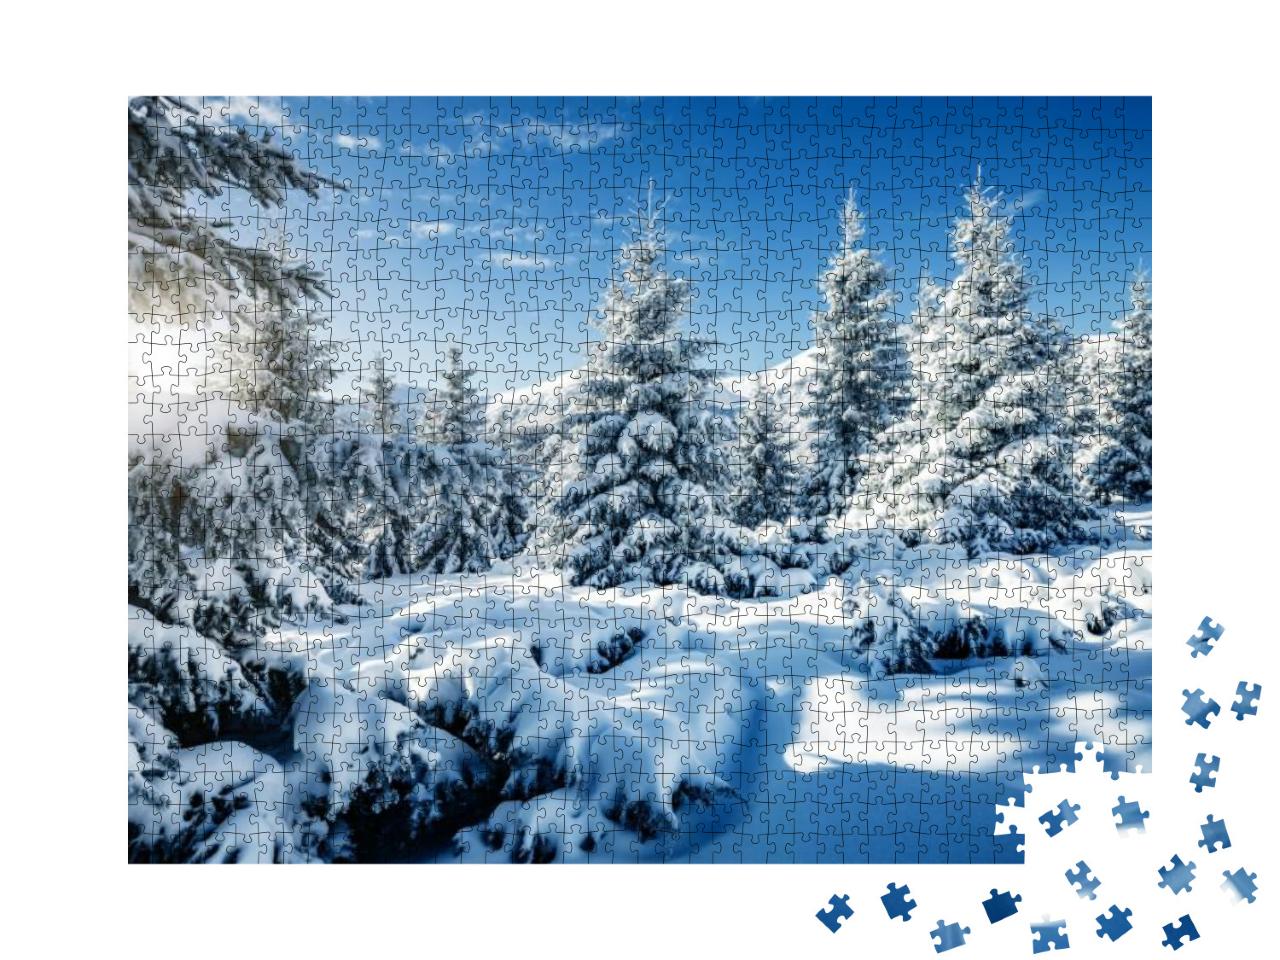 Majestic White Spruces Glowing by Sunlight. Picturesque &... Jigsaw Puzzle with 1000 pieces